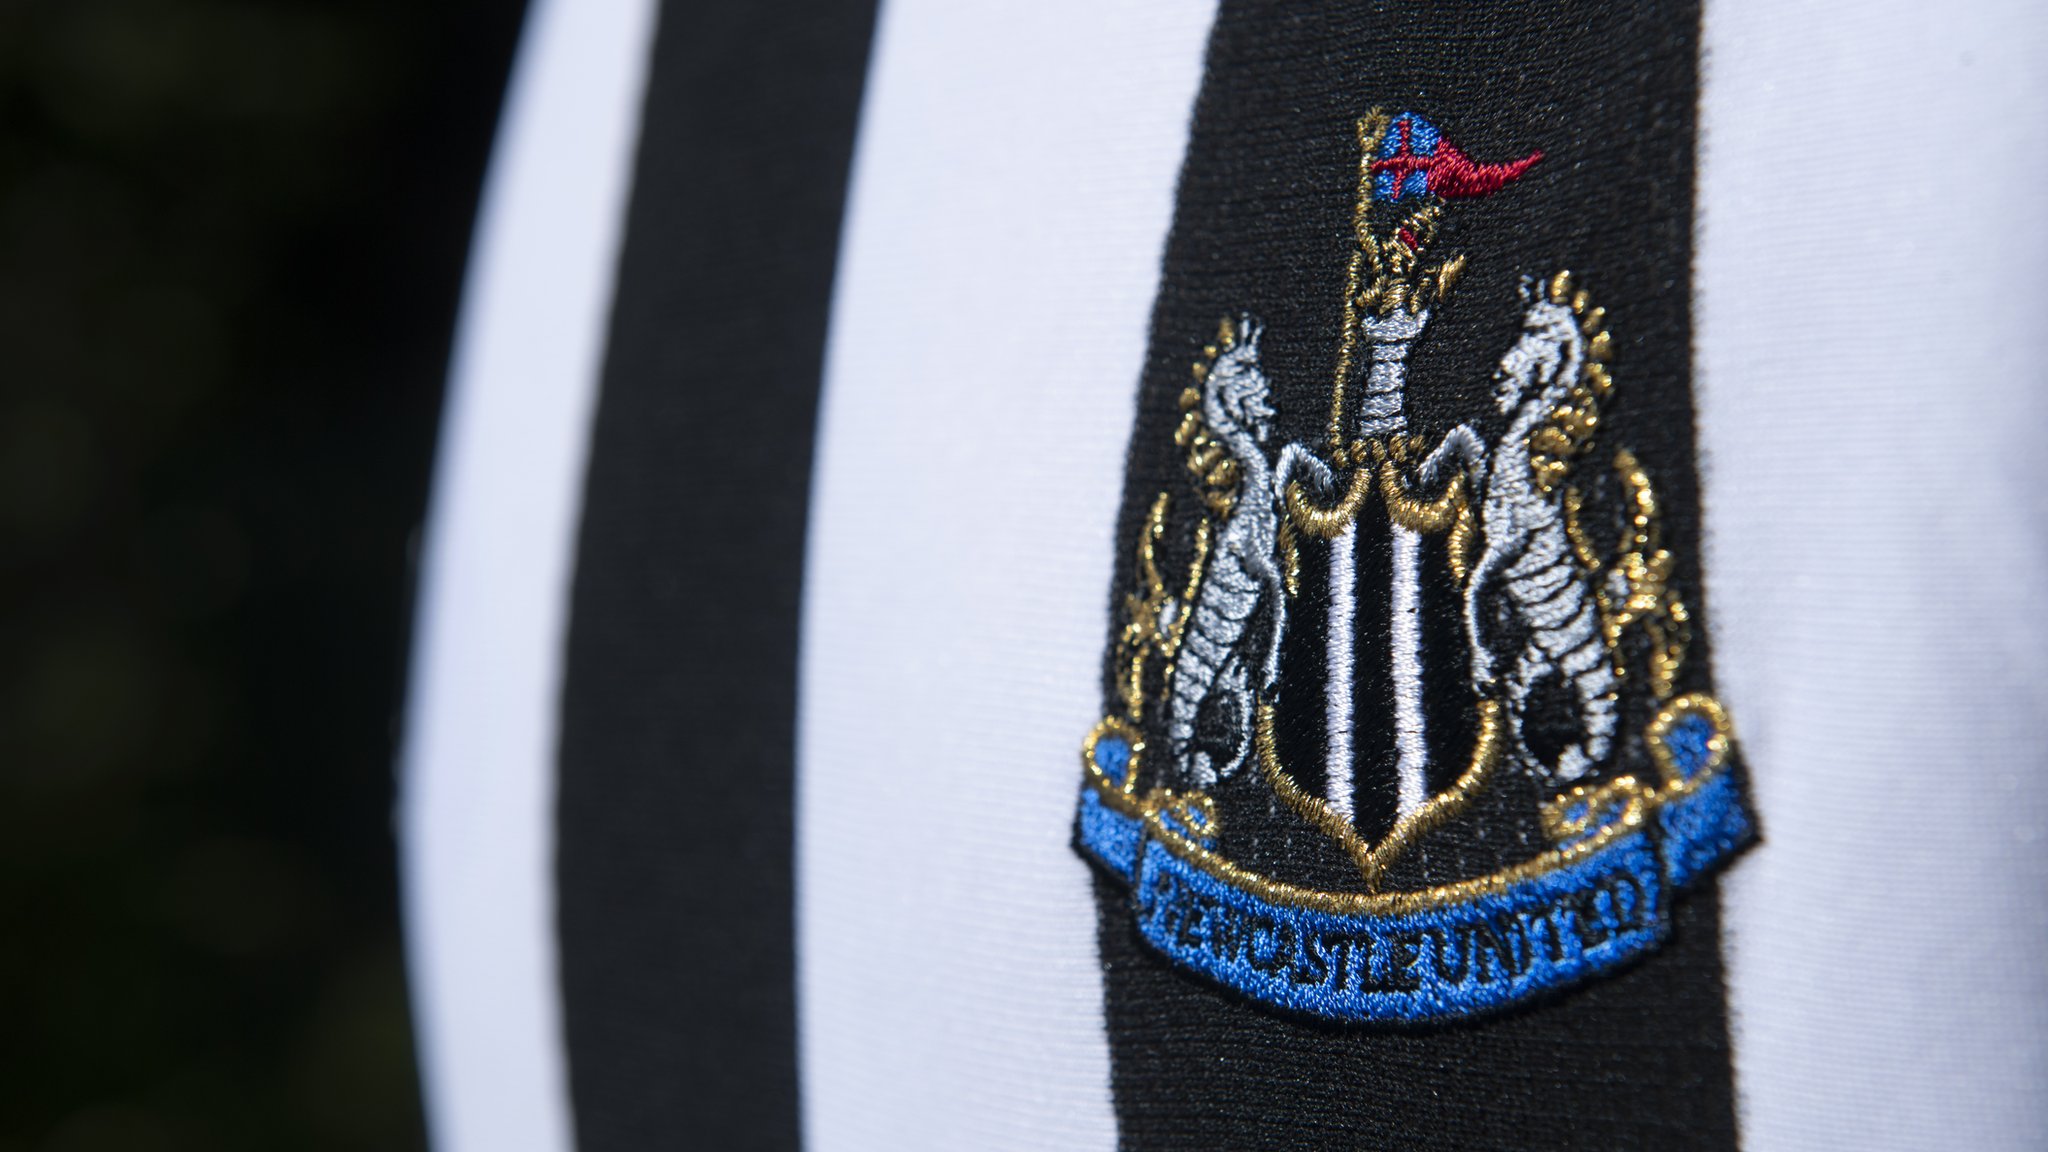 Newcastle taking legal action against Premier League after failed takeover bid